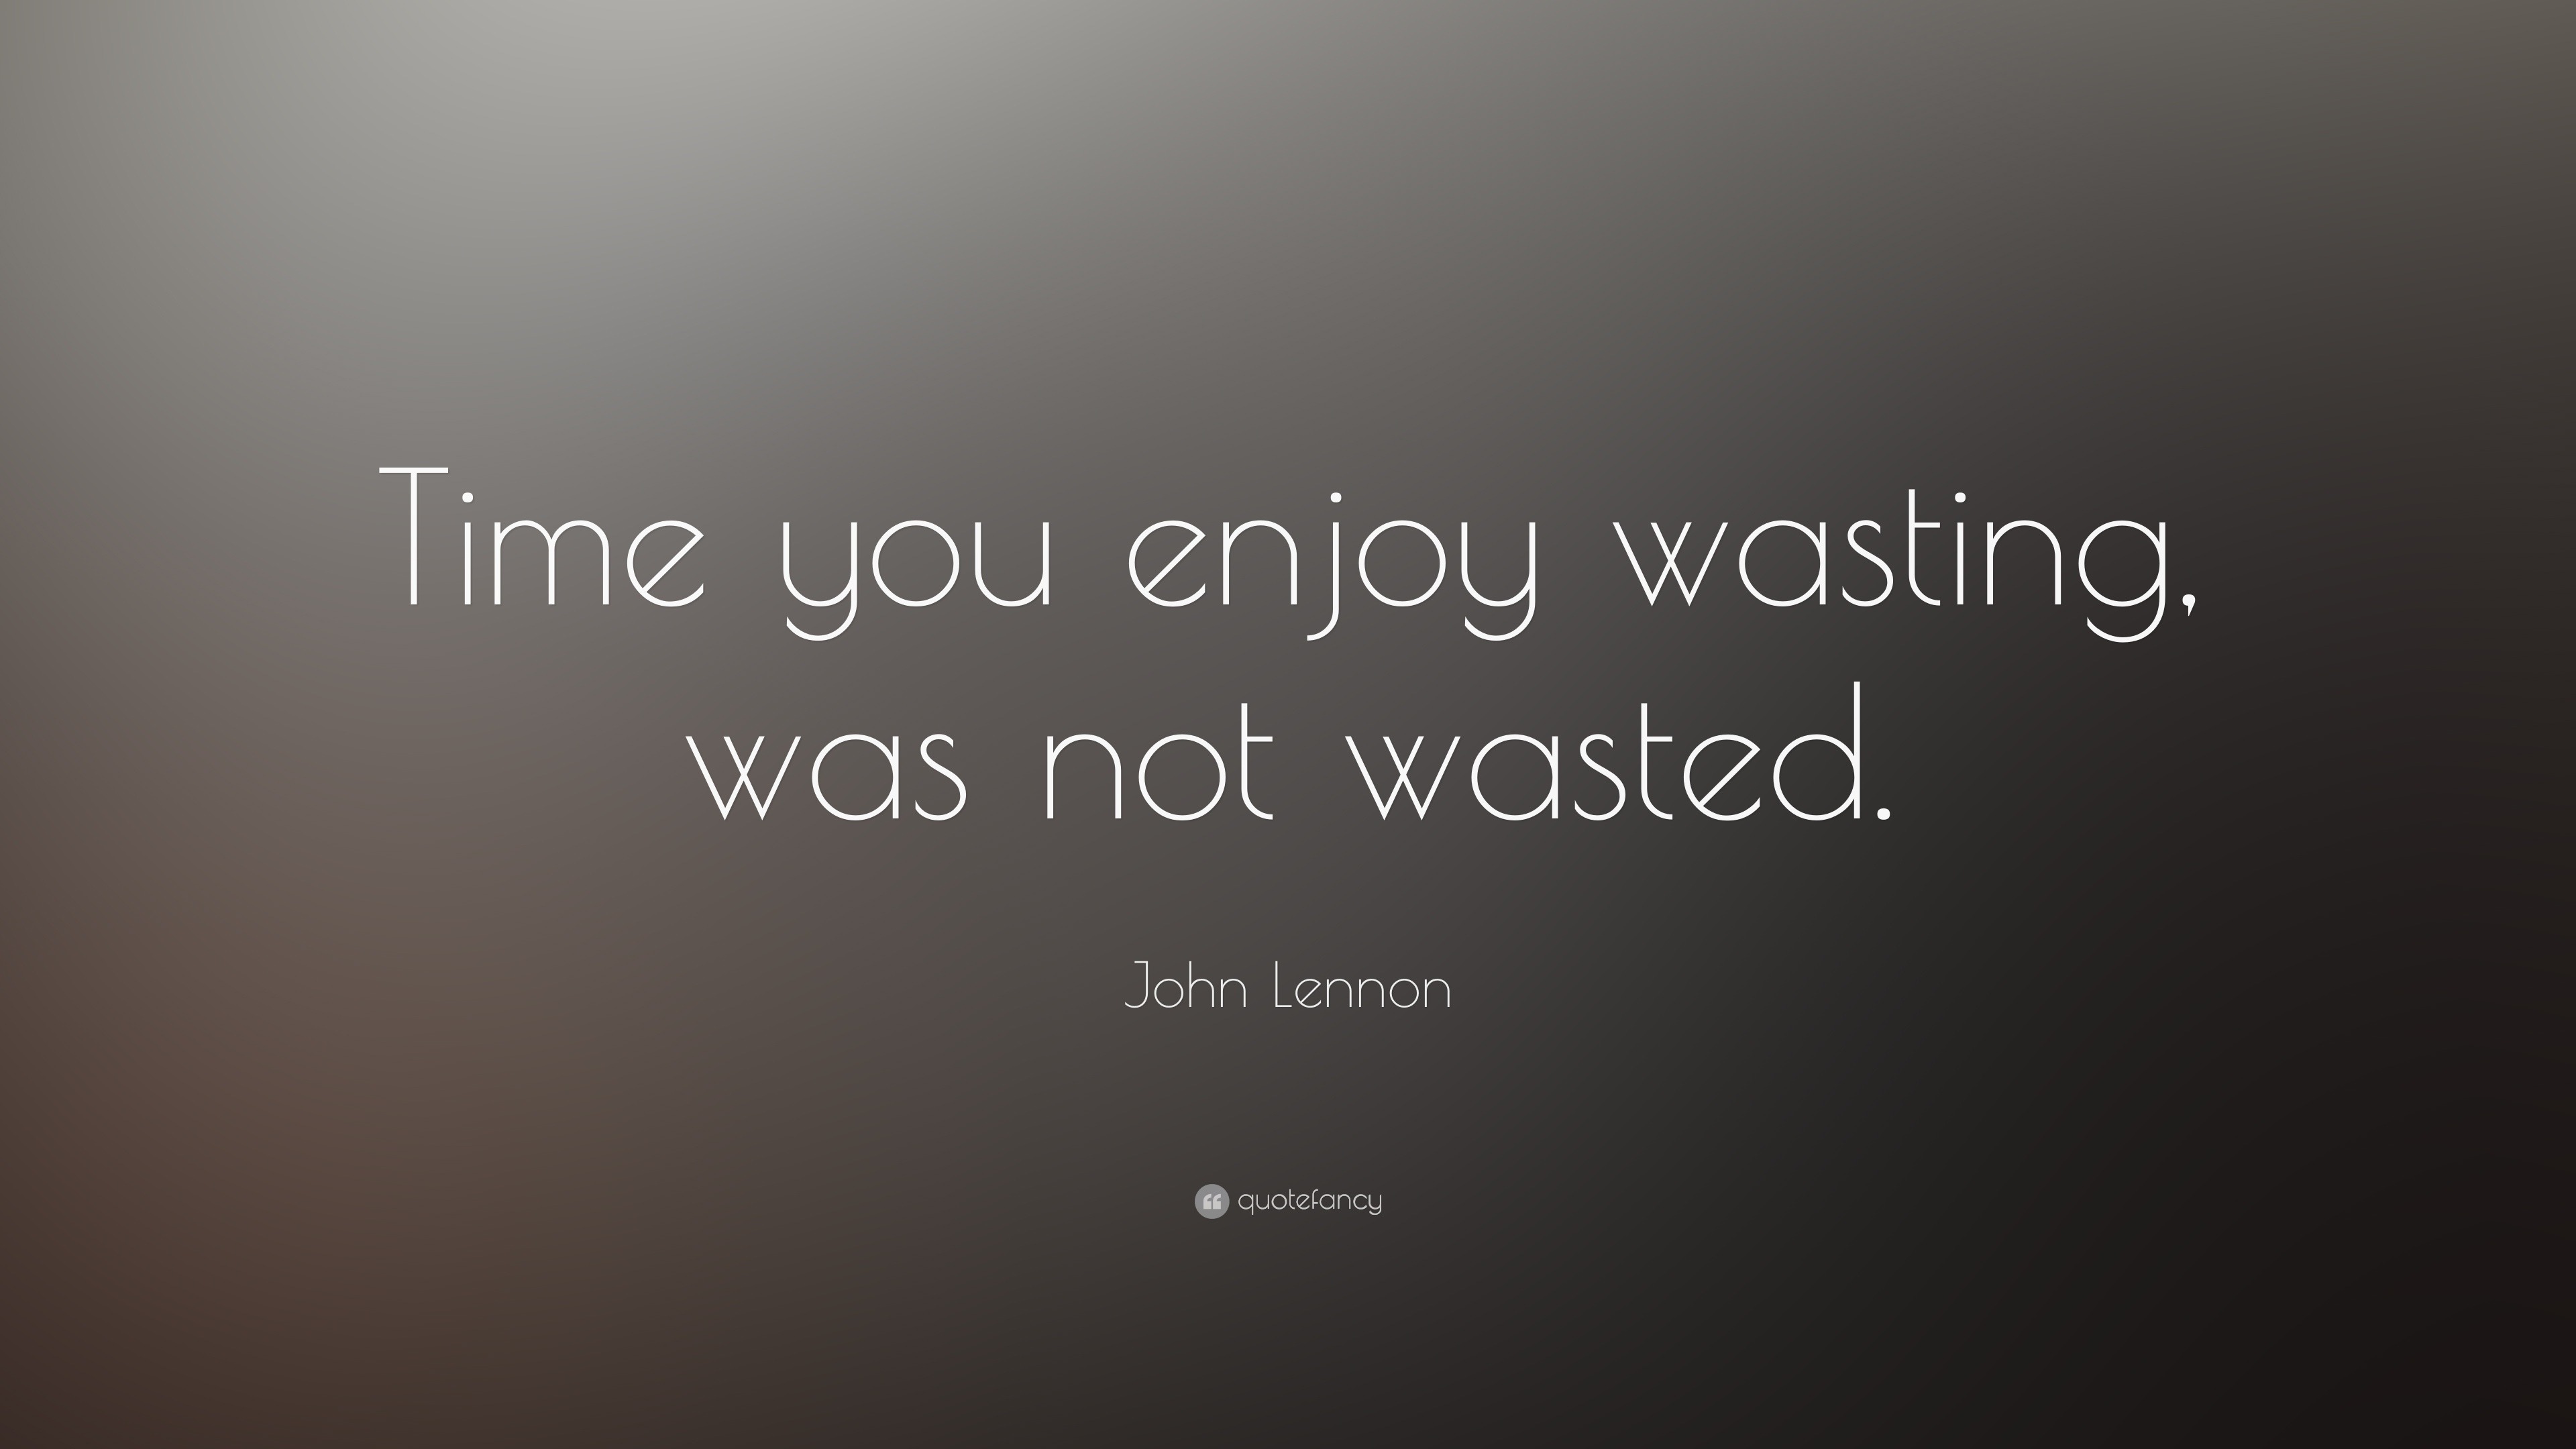 John Lennon Quote “Time you enjoy wasting was not wasted ”